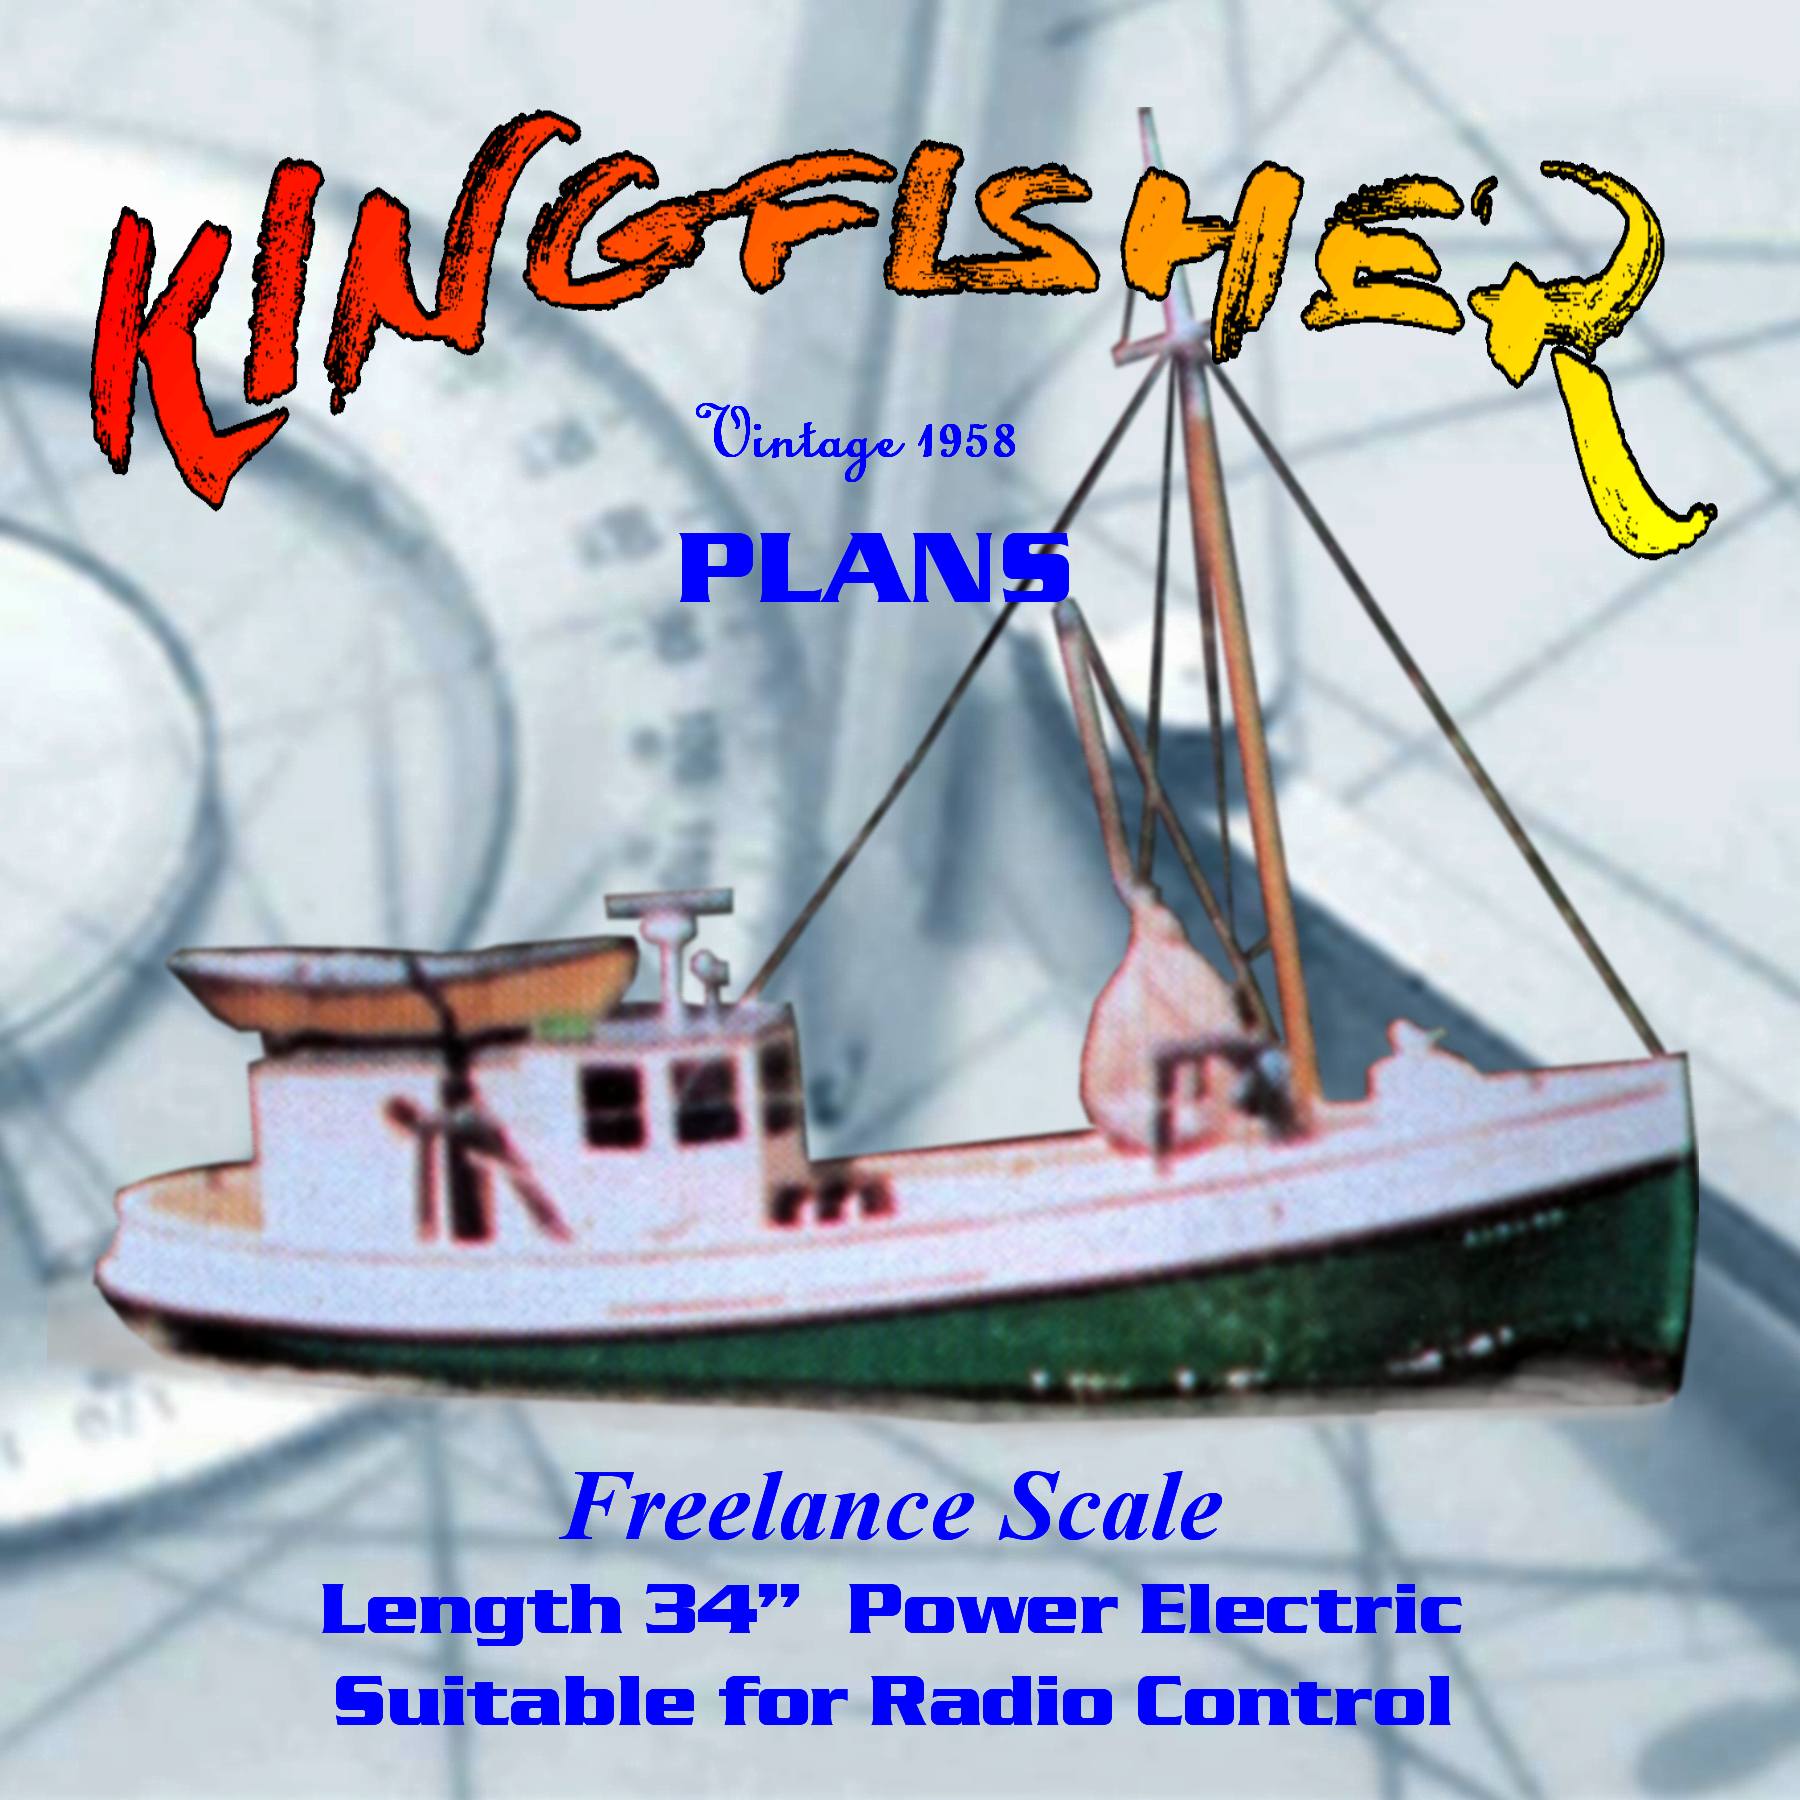 full size printed plans 34" kingfisher jersey coast dragger  for radio control